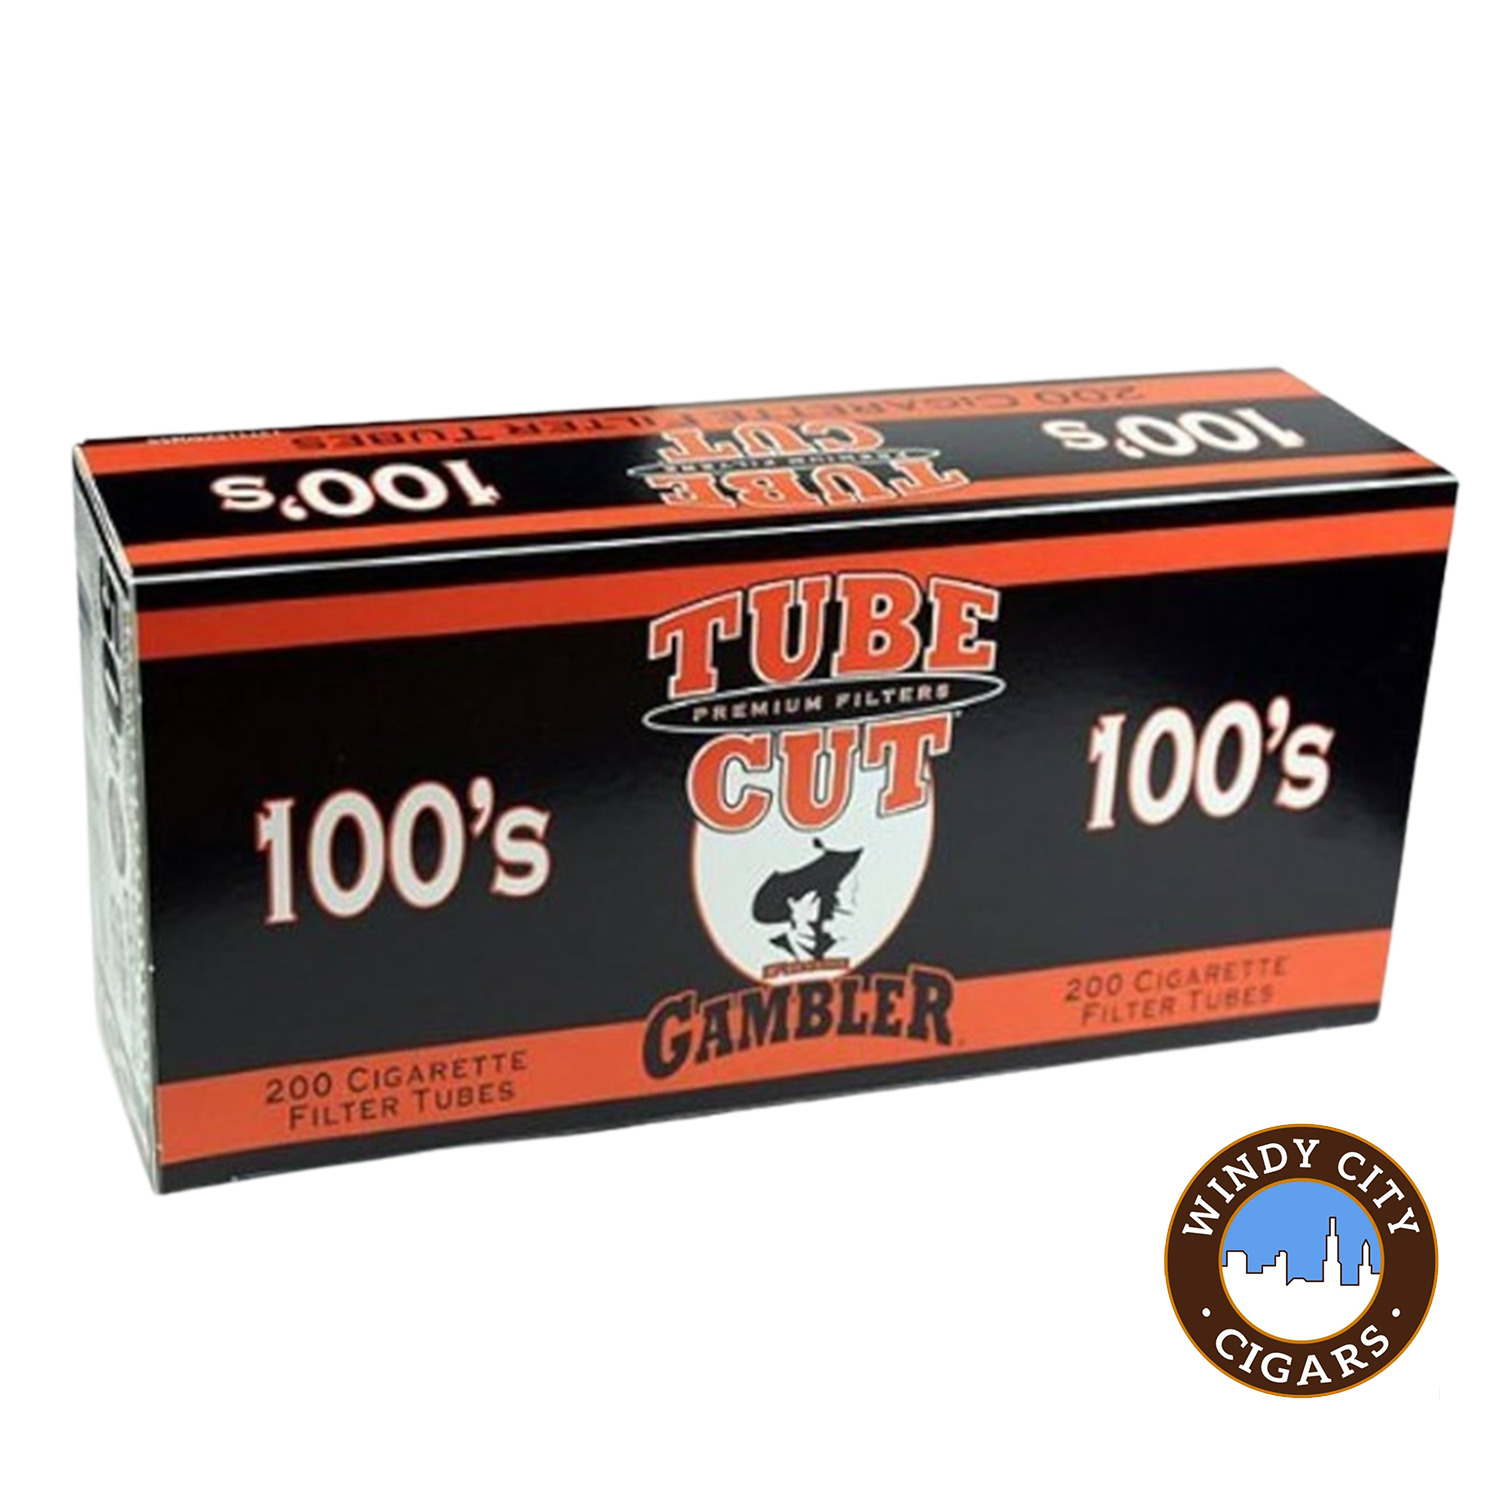 Tube Cut Red 100s Cigarette 200ct Tubes - 5 Boxes